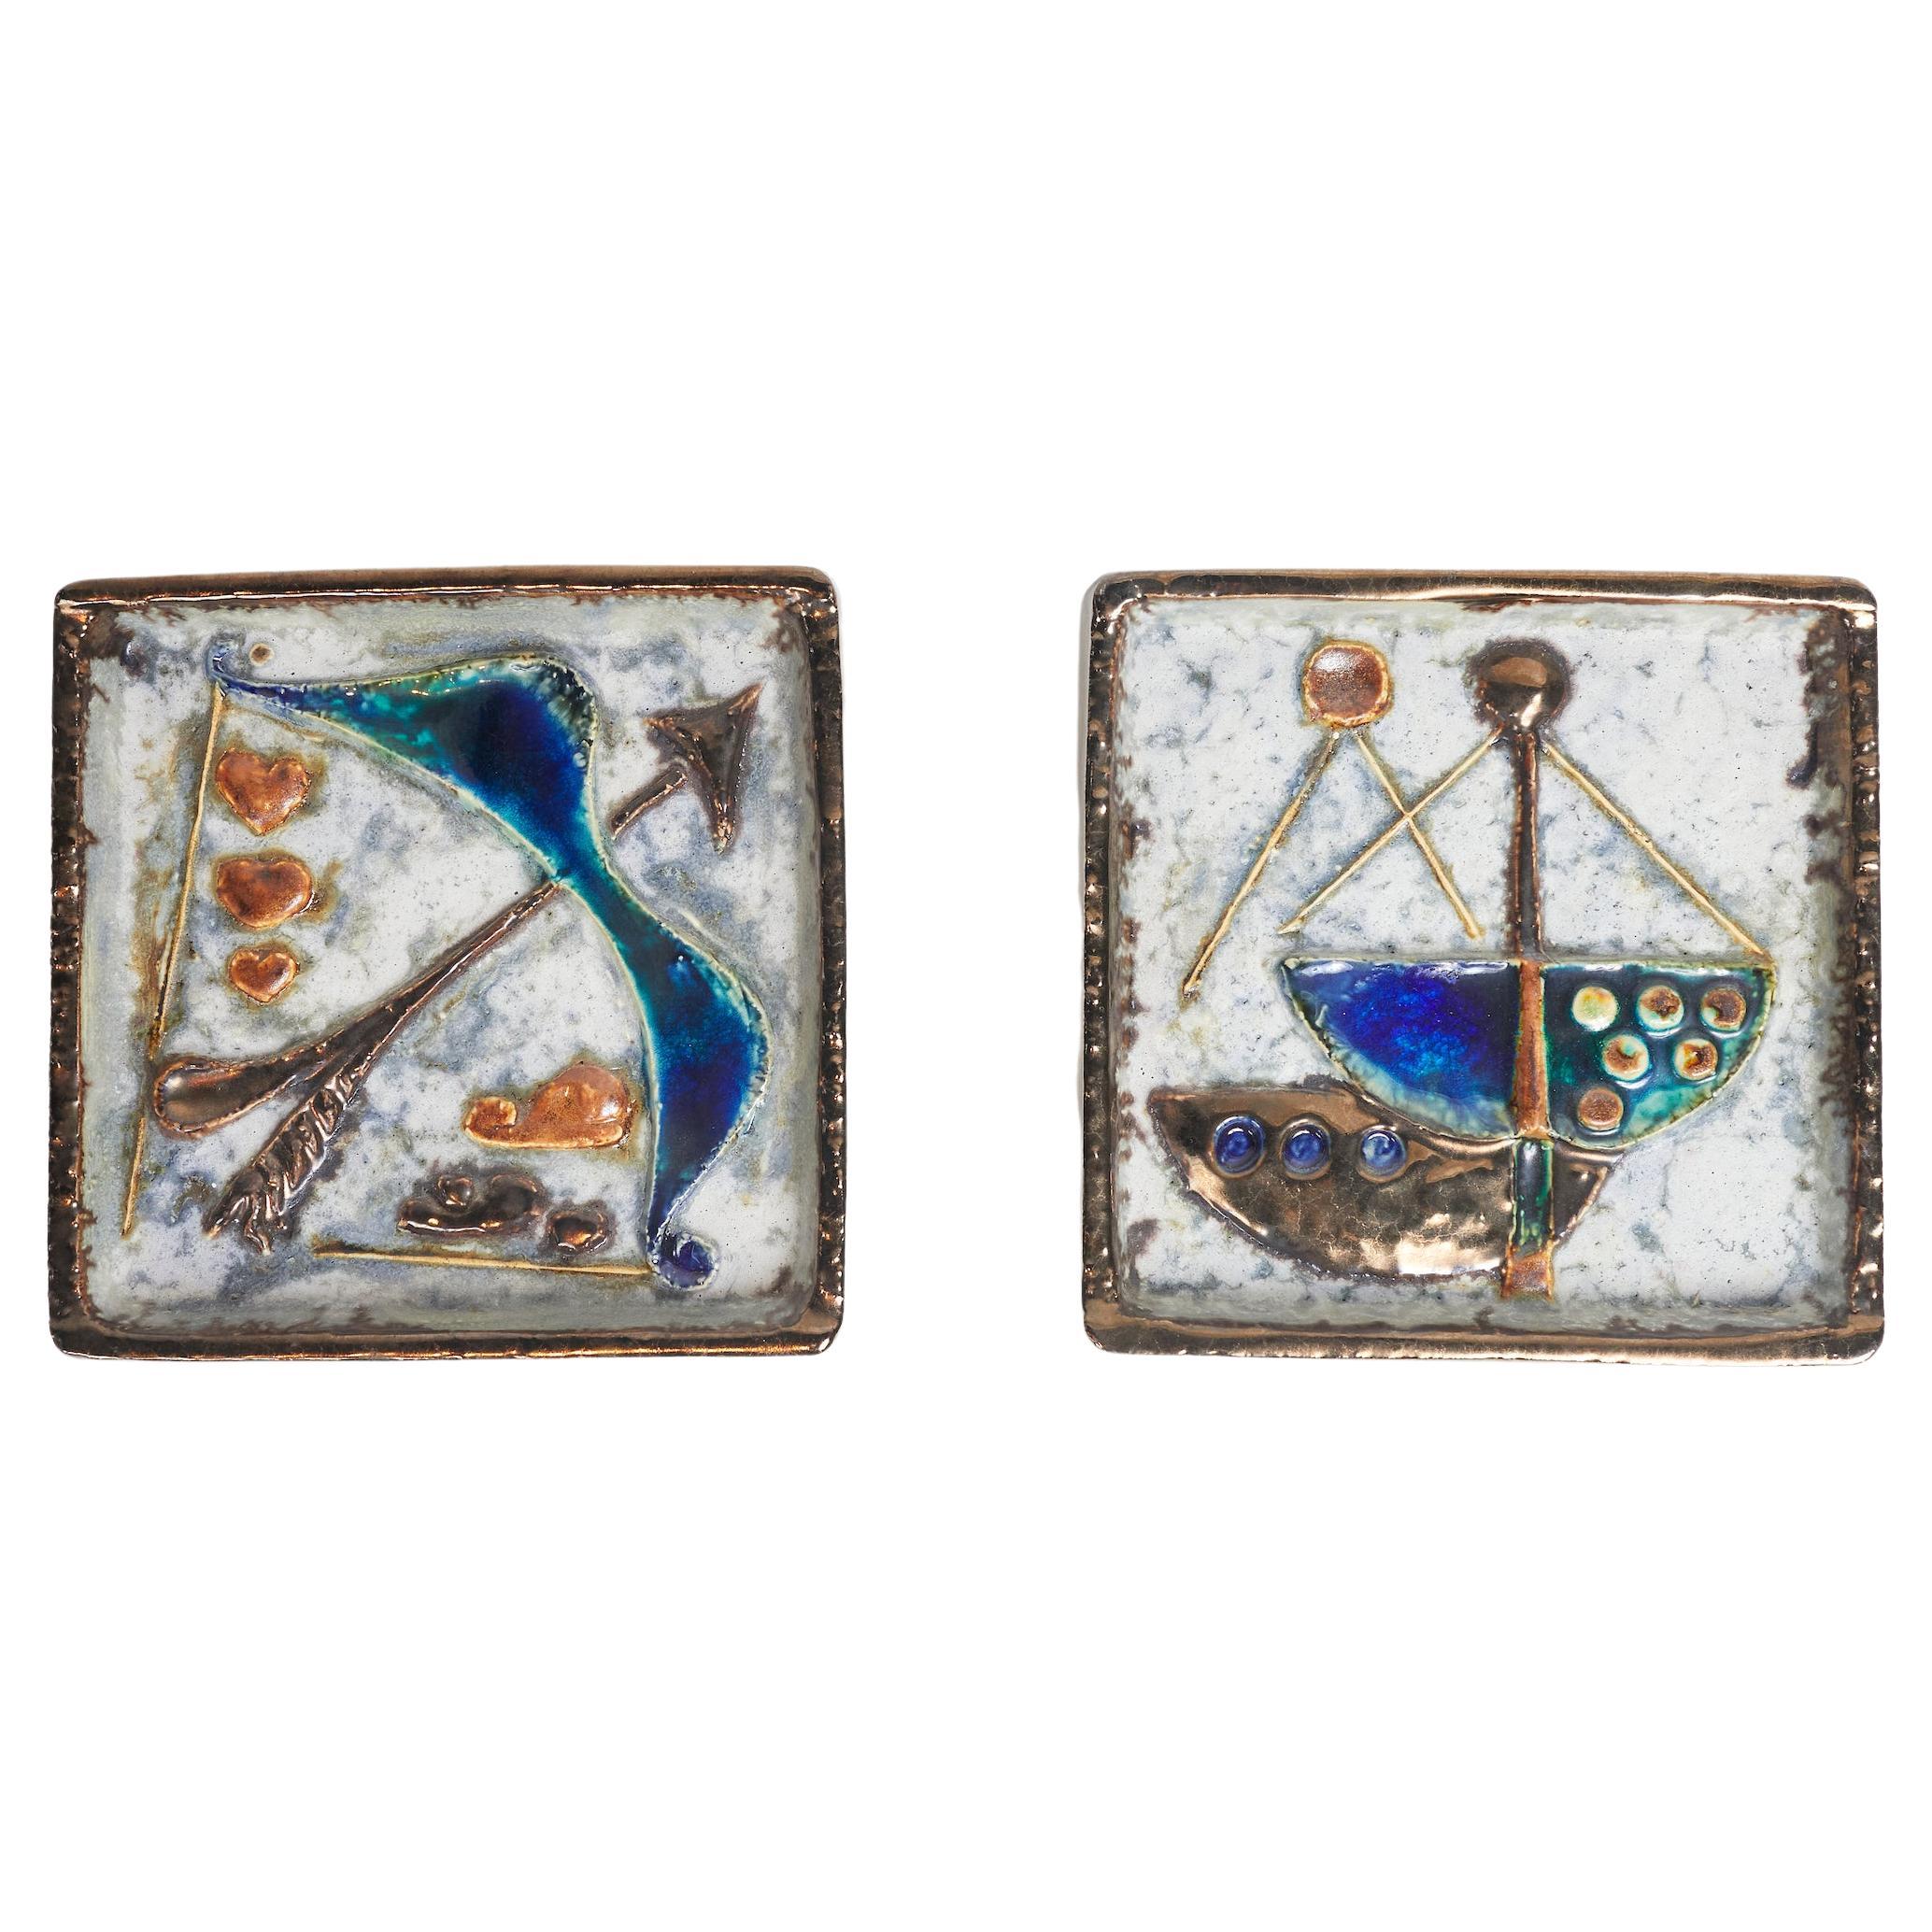 Pair of Colourful Glazed Ceramic Wall Plaques by Helmut Schärfenacker